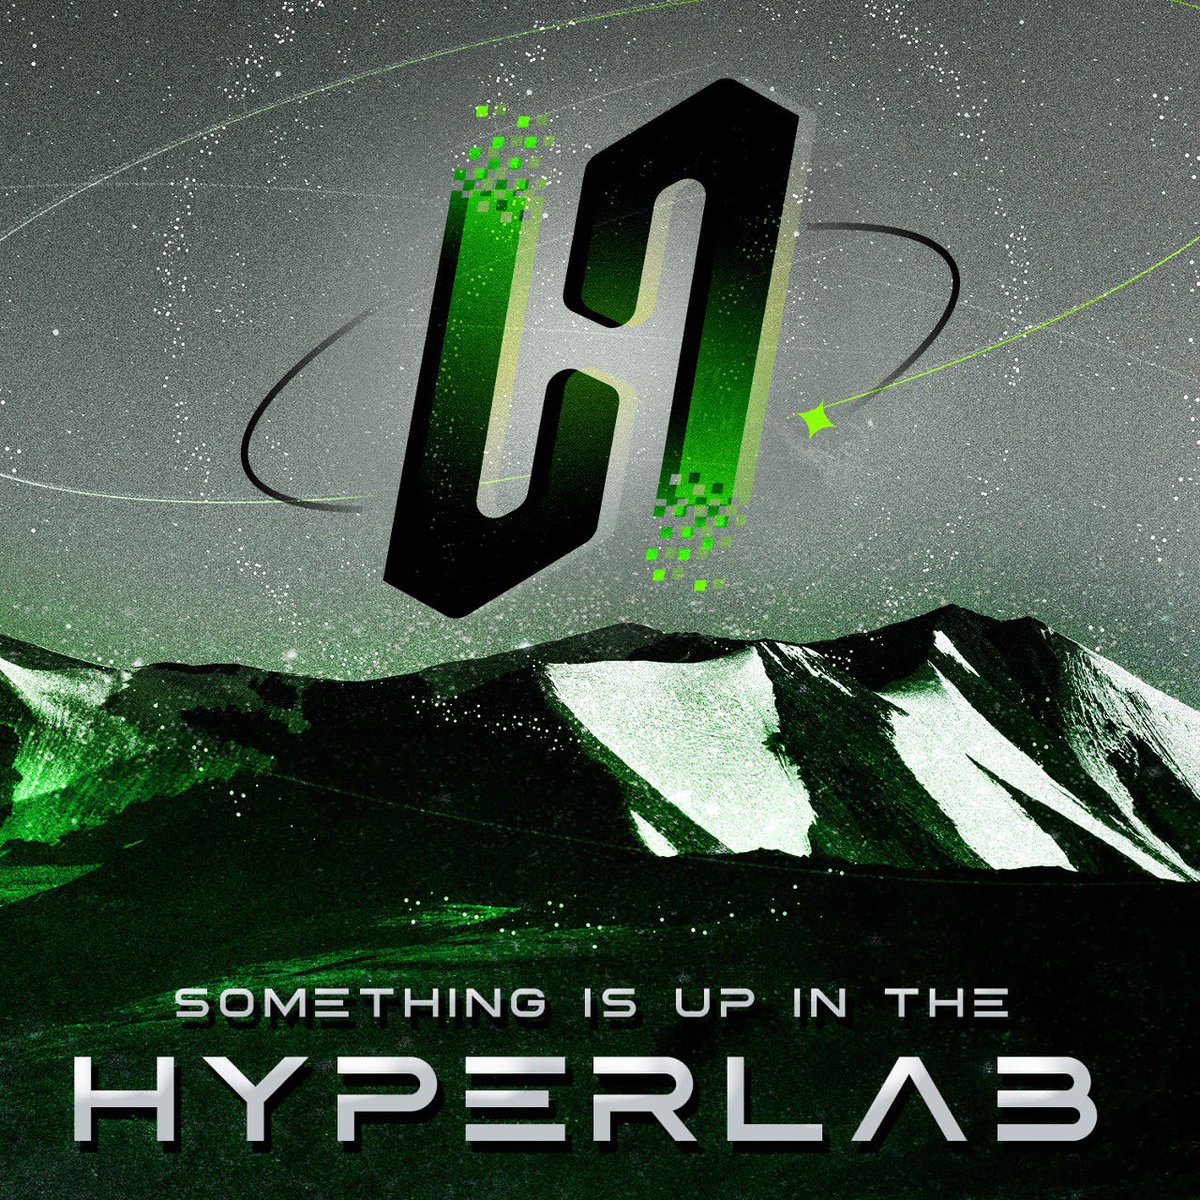 Something is up in the HyperLab...🧑‍🔬👩‍🔬 Could you smell it?👃 #hyperverse #hypercosmos #hyperlab #hypercommunity #metaverse #blockchain #crypto #defi #dao #eth #btc